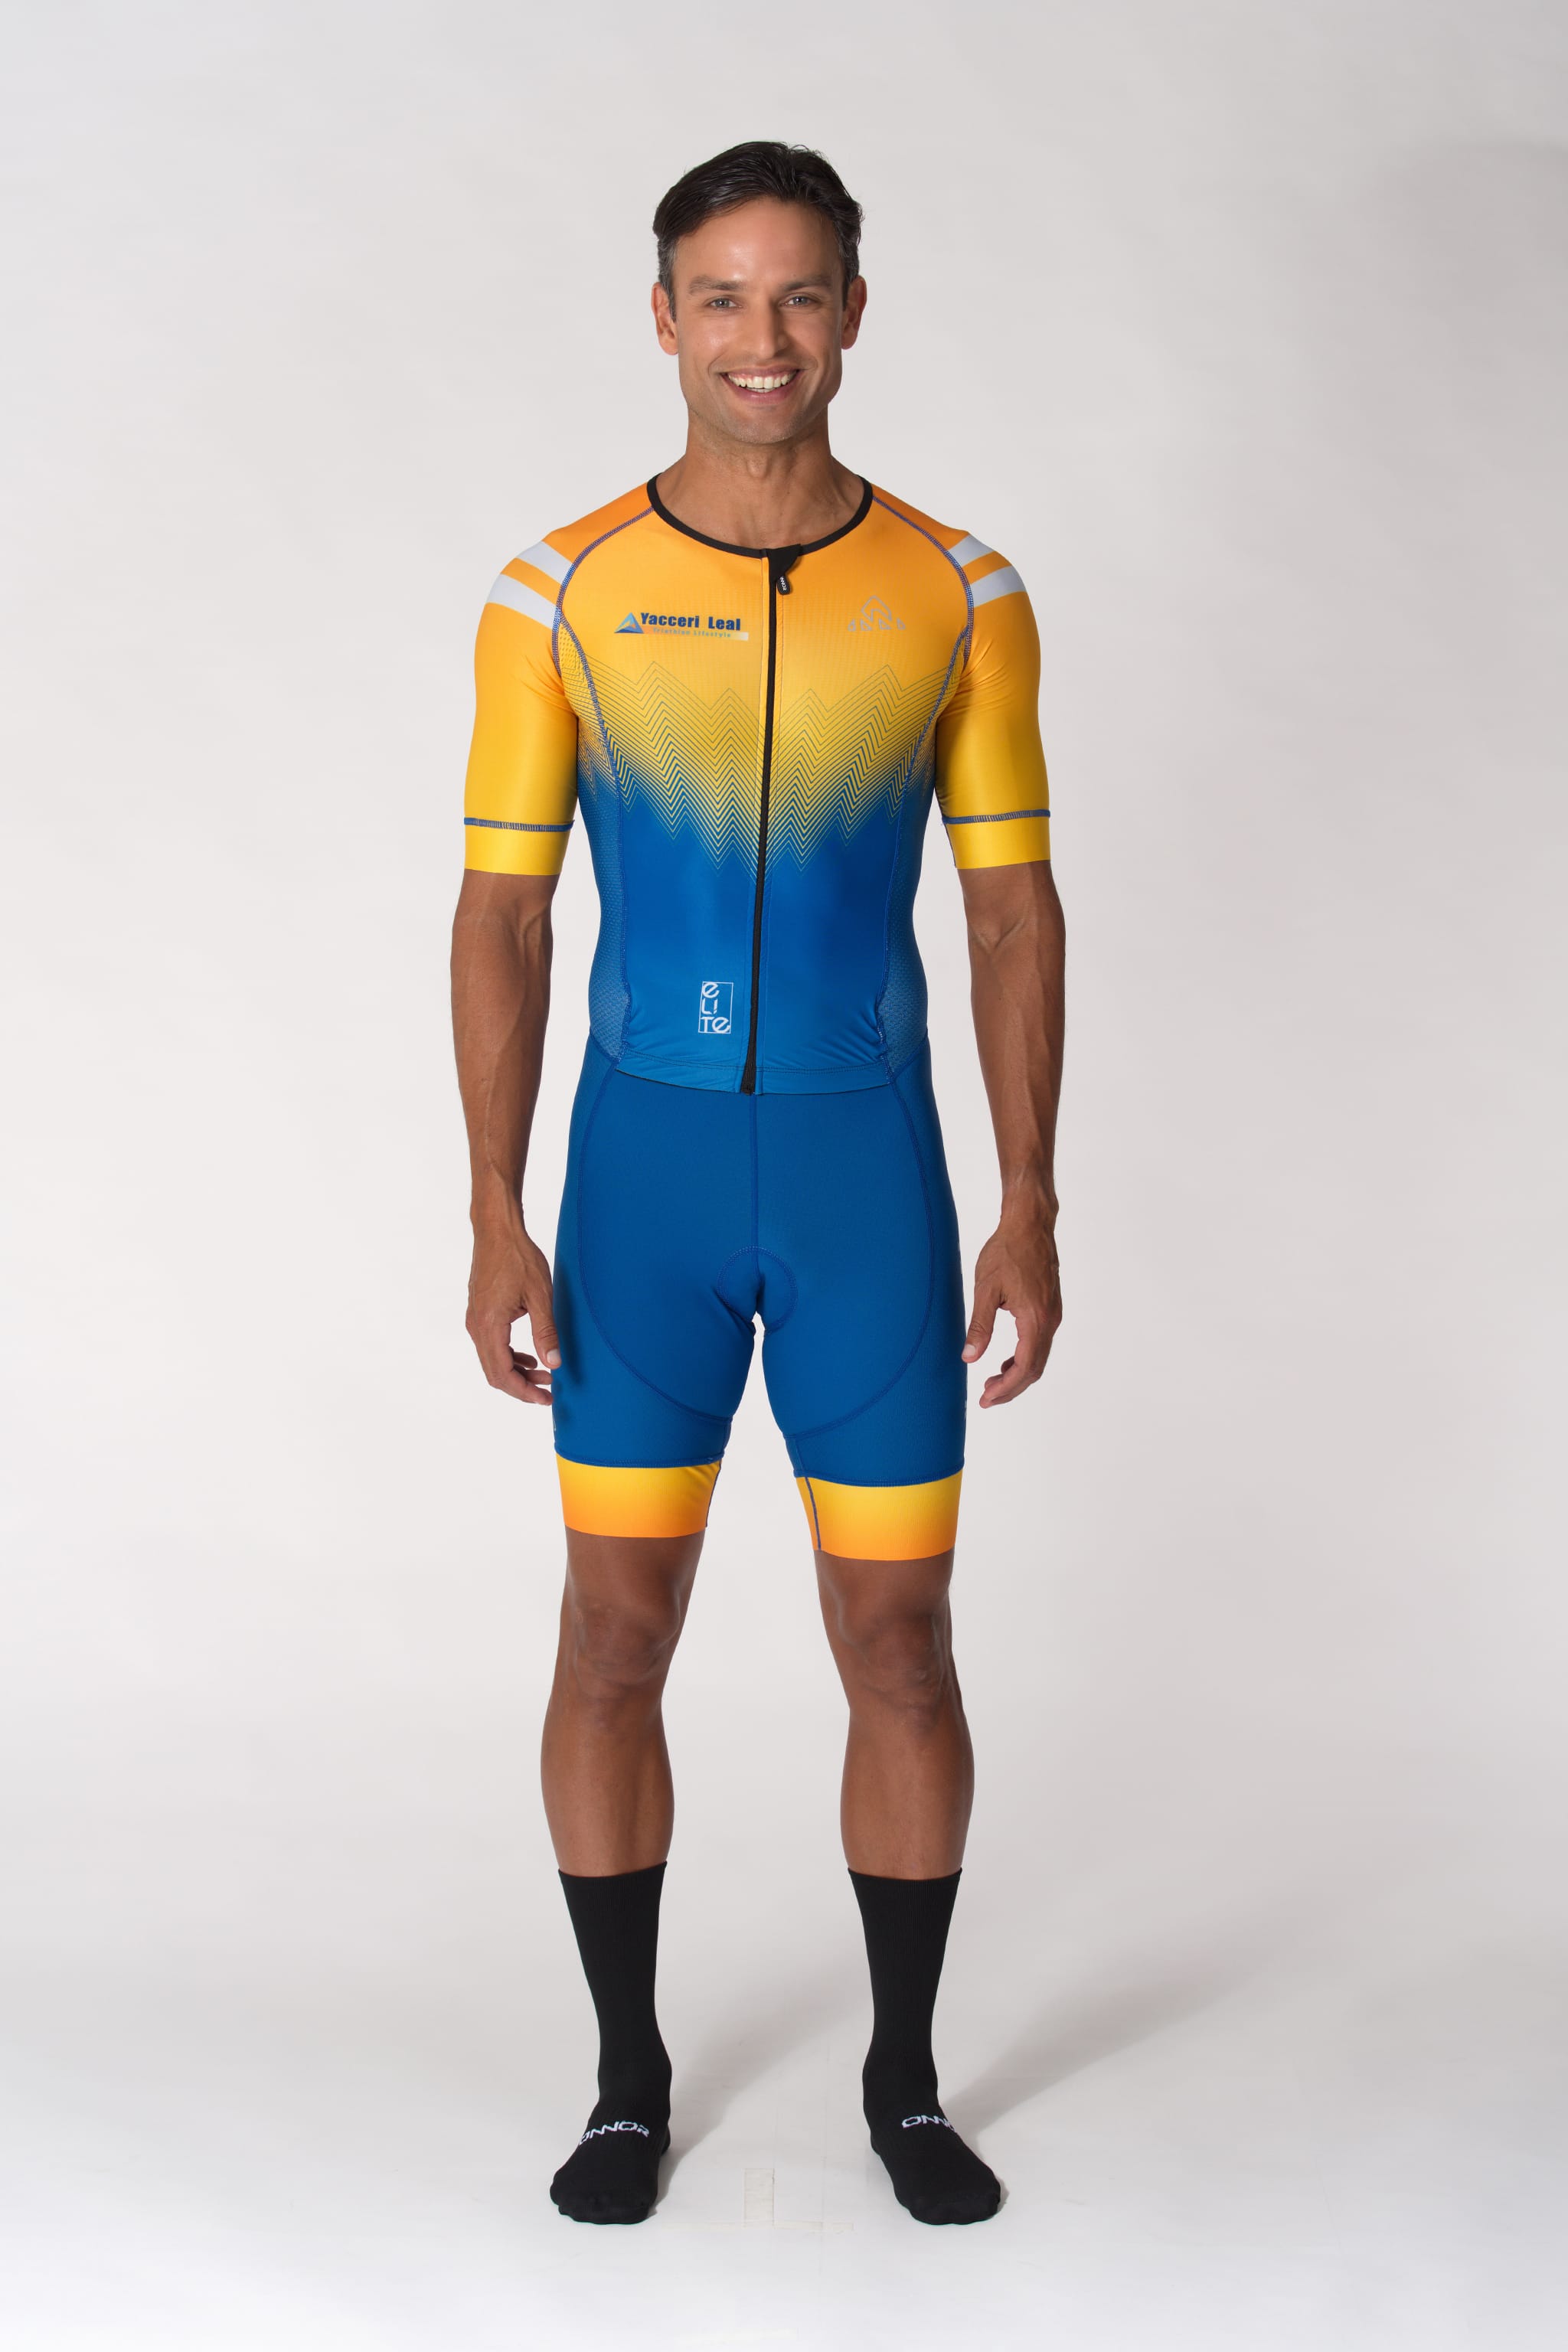 Unique Cycling Kits Custom Made in Miami